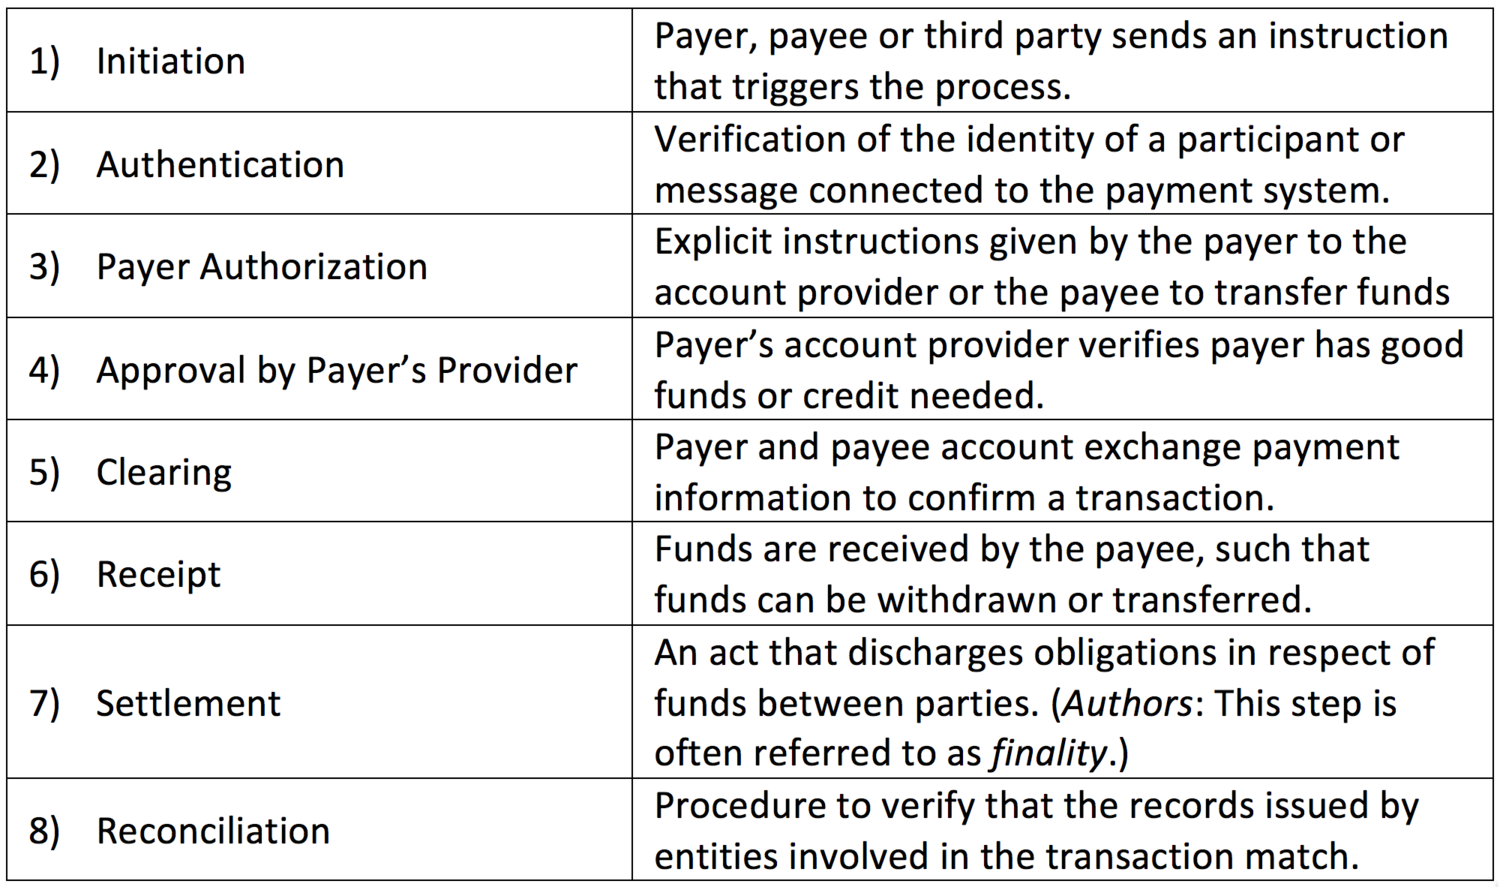 Source: Faster Payments Task Force, The U.S. Path to Faster Payments: Final Report Part One, Table 2, page 18.